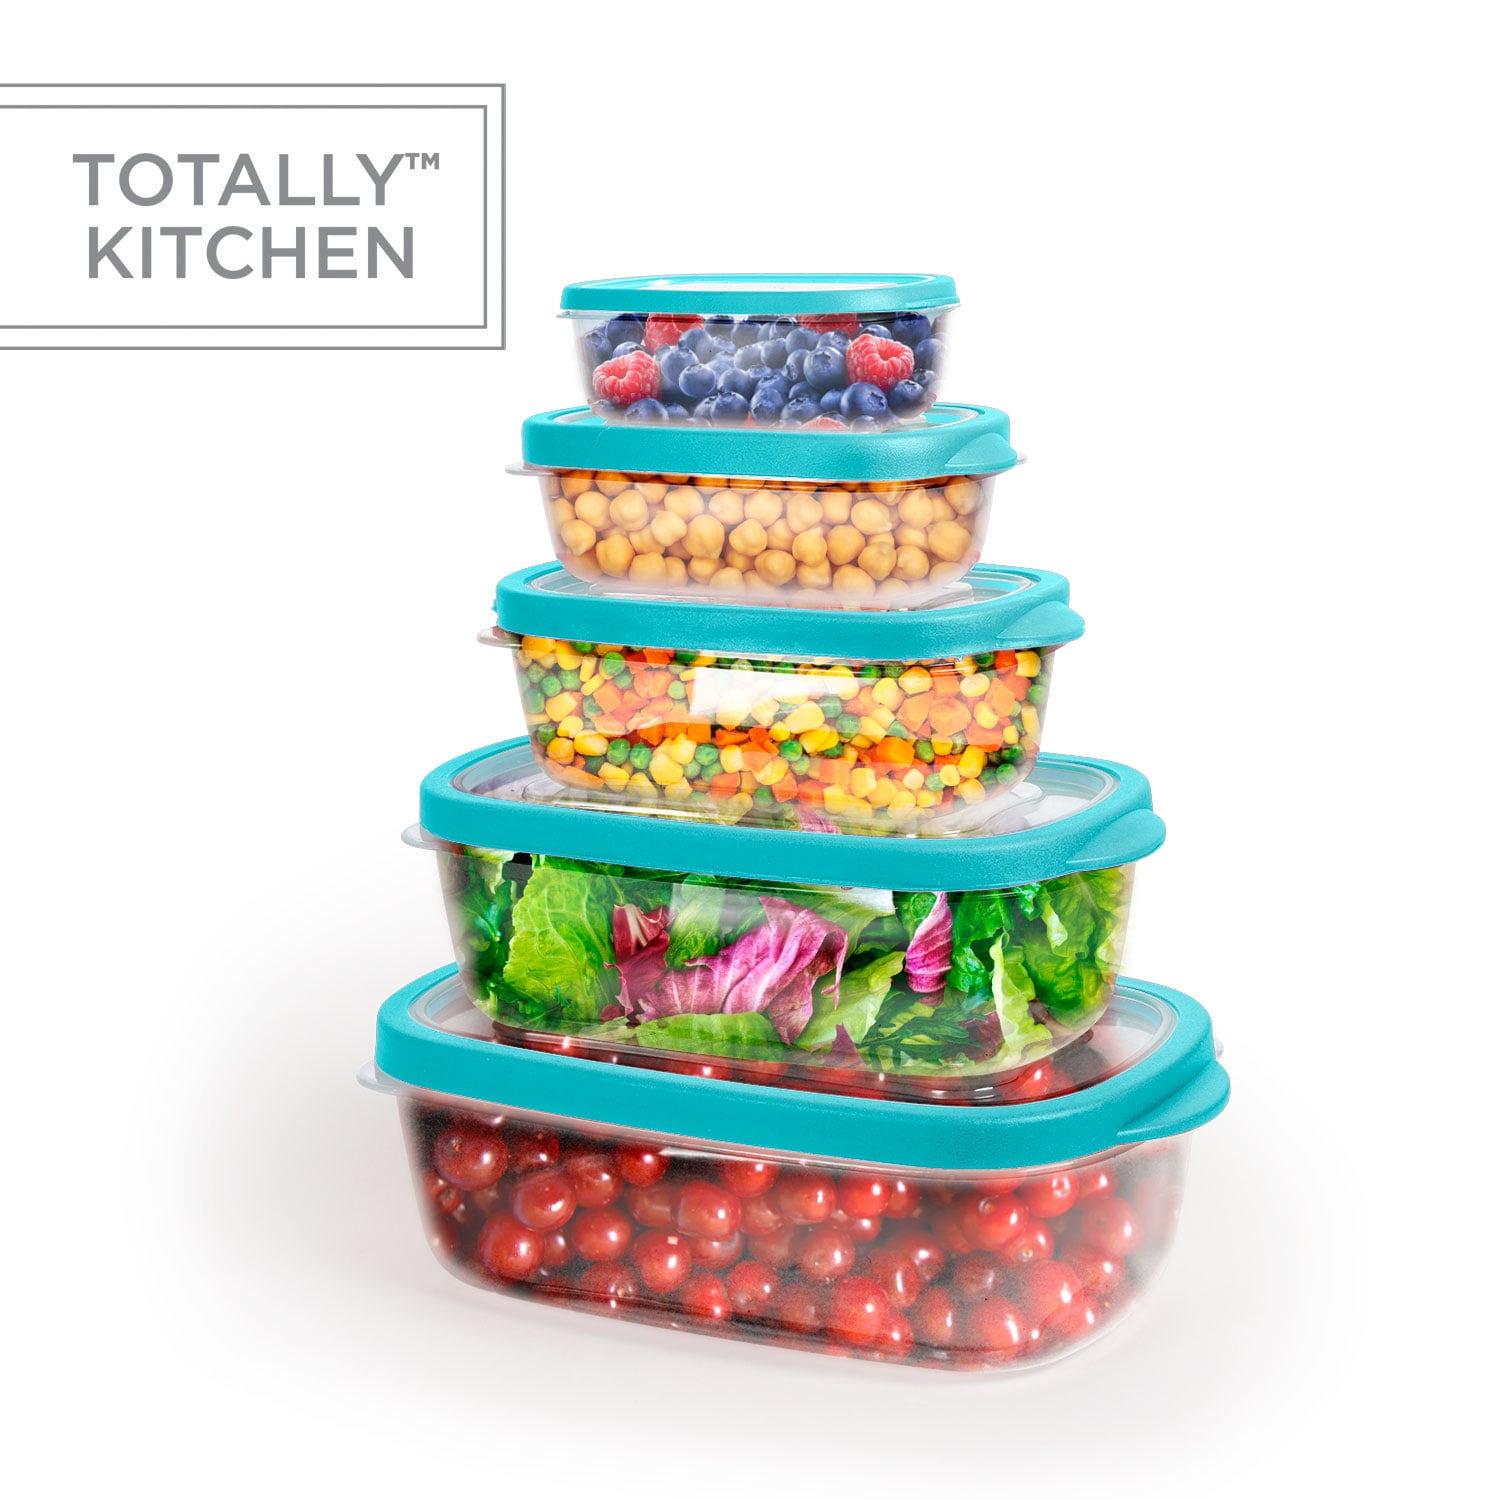 Tupperware tumbles as cheaper rivals, to-go containers proliferate